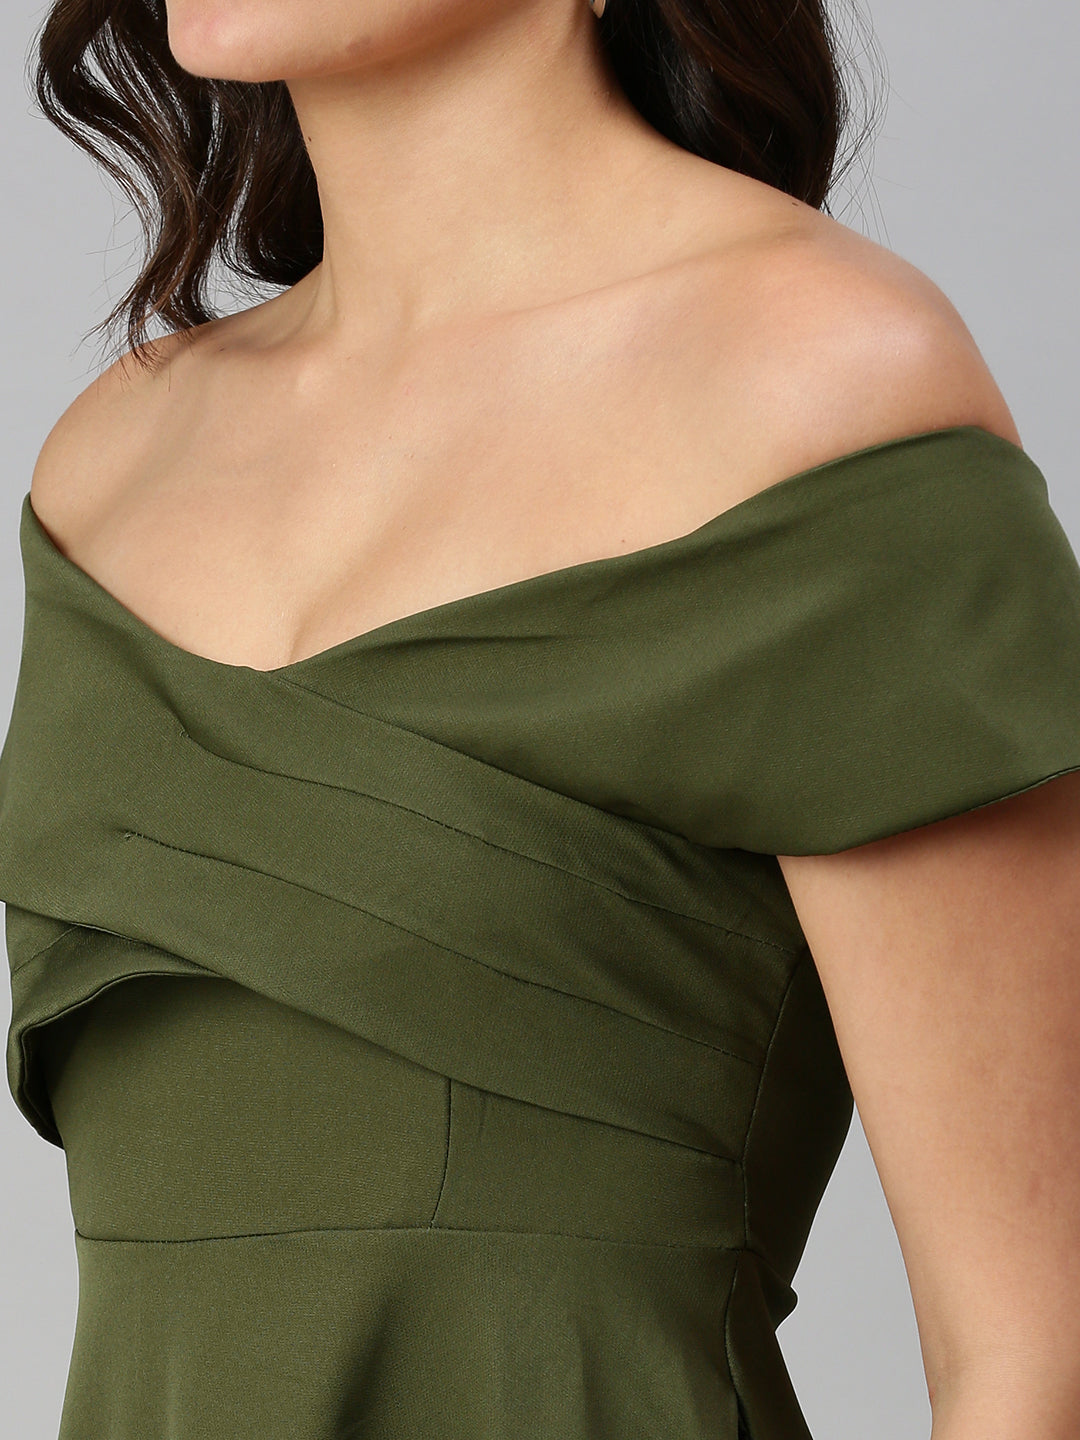 Women Boat Neck Solid Fit and Flare Olive Dress